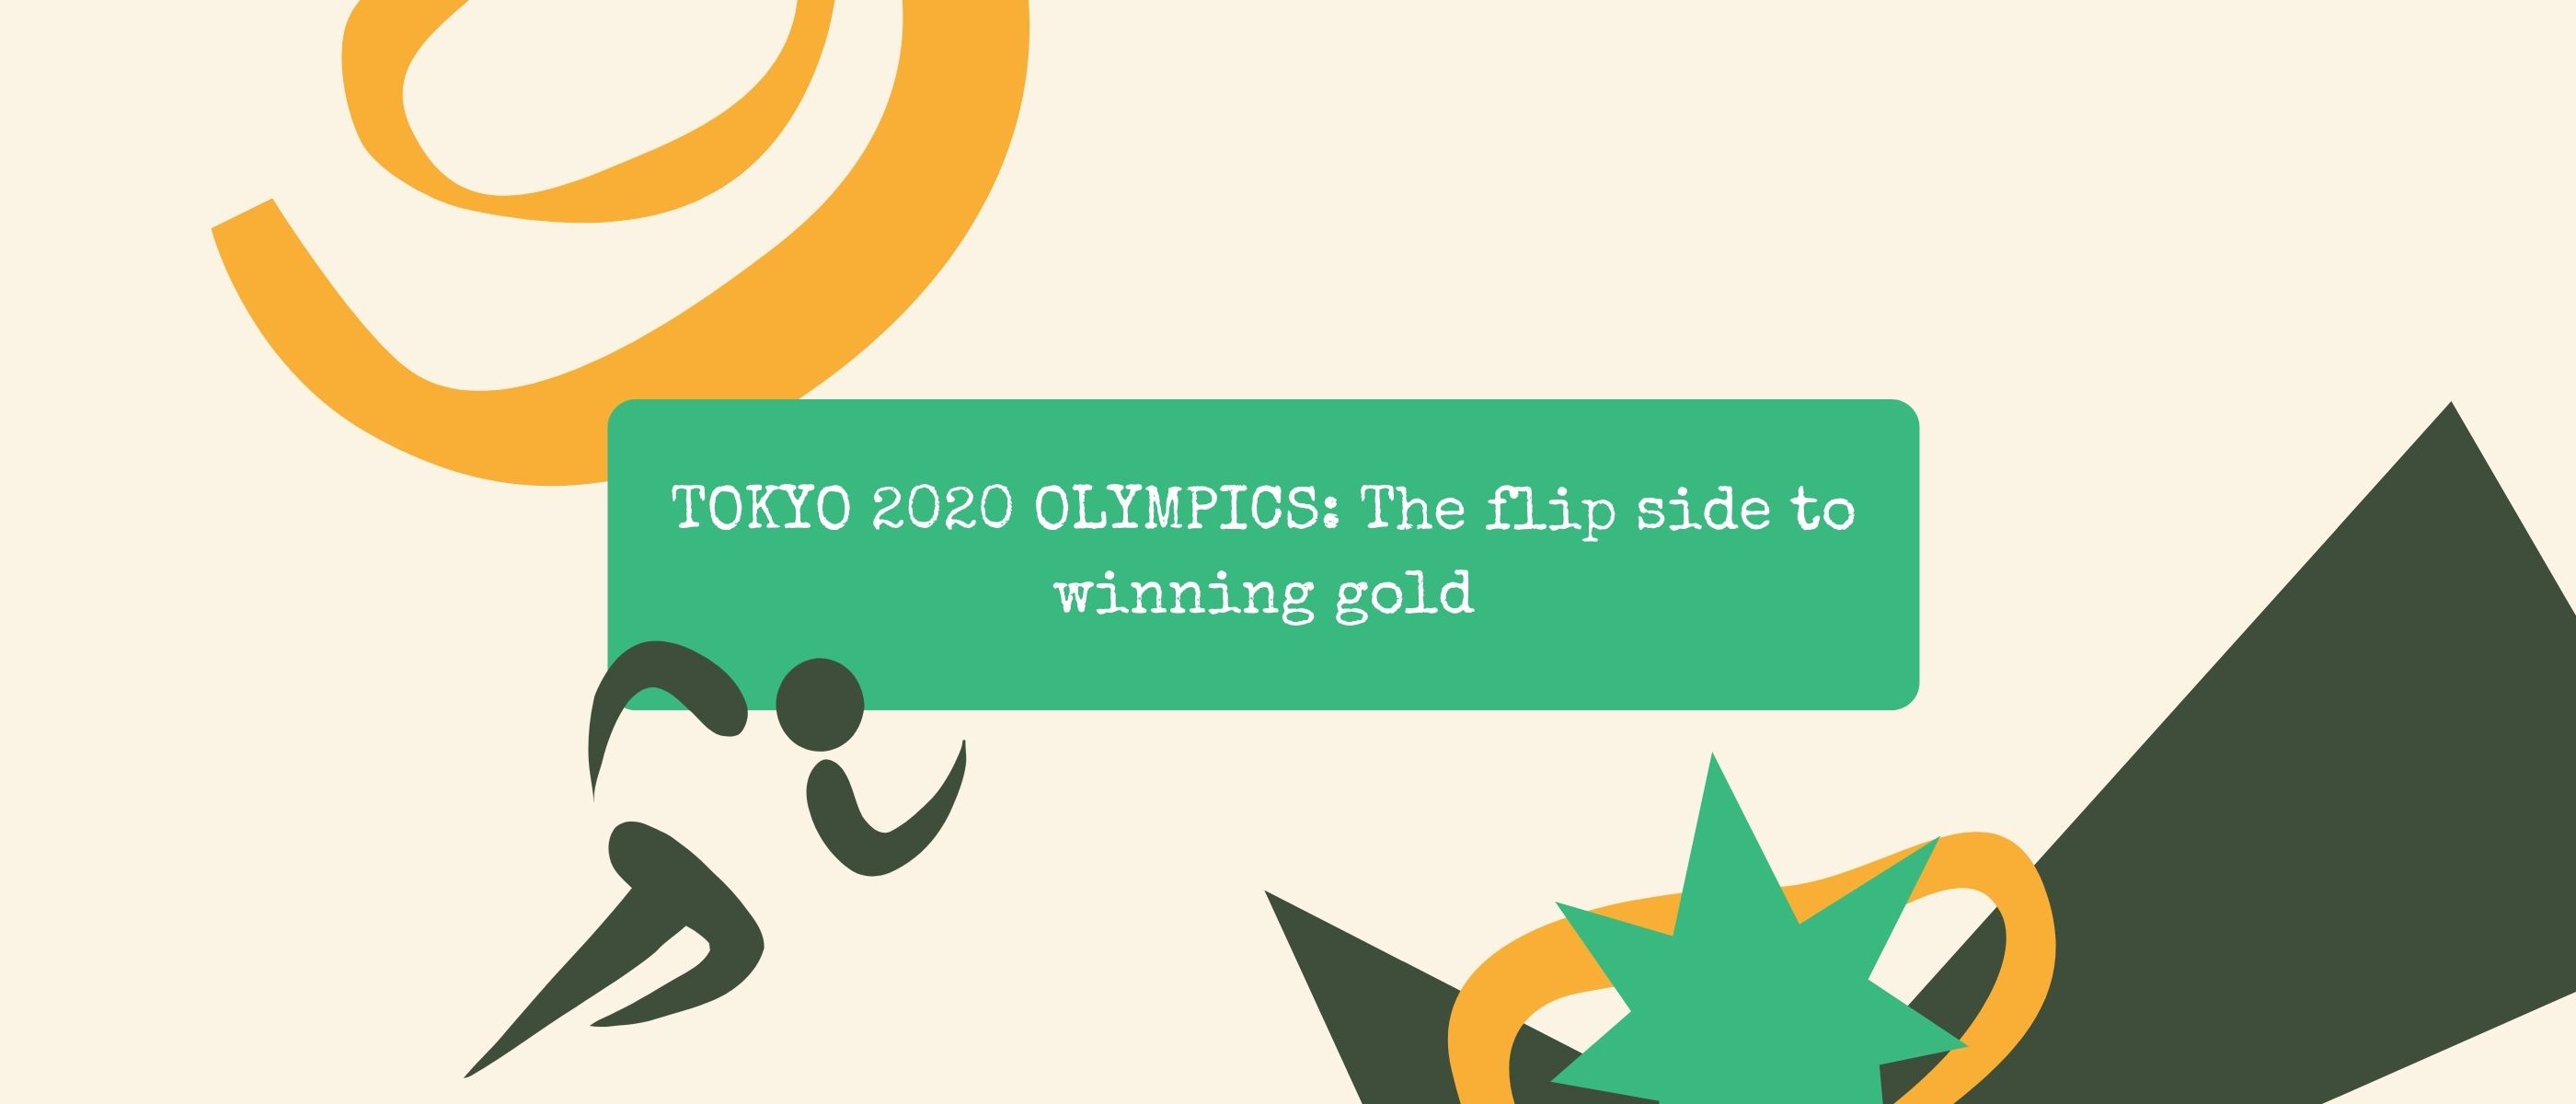 Tokyo 2020 Olympics: The flip side to winning gold